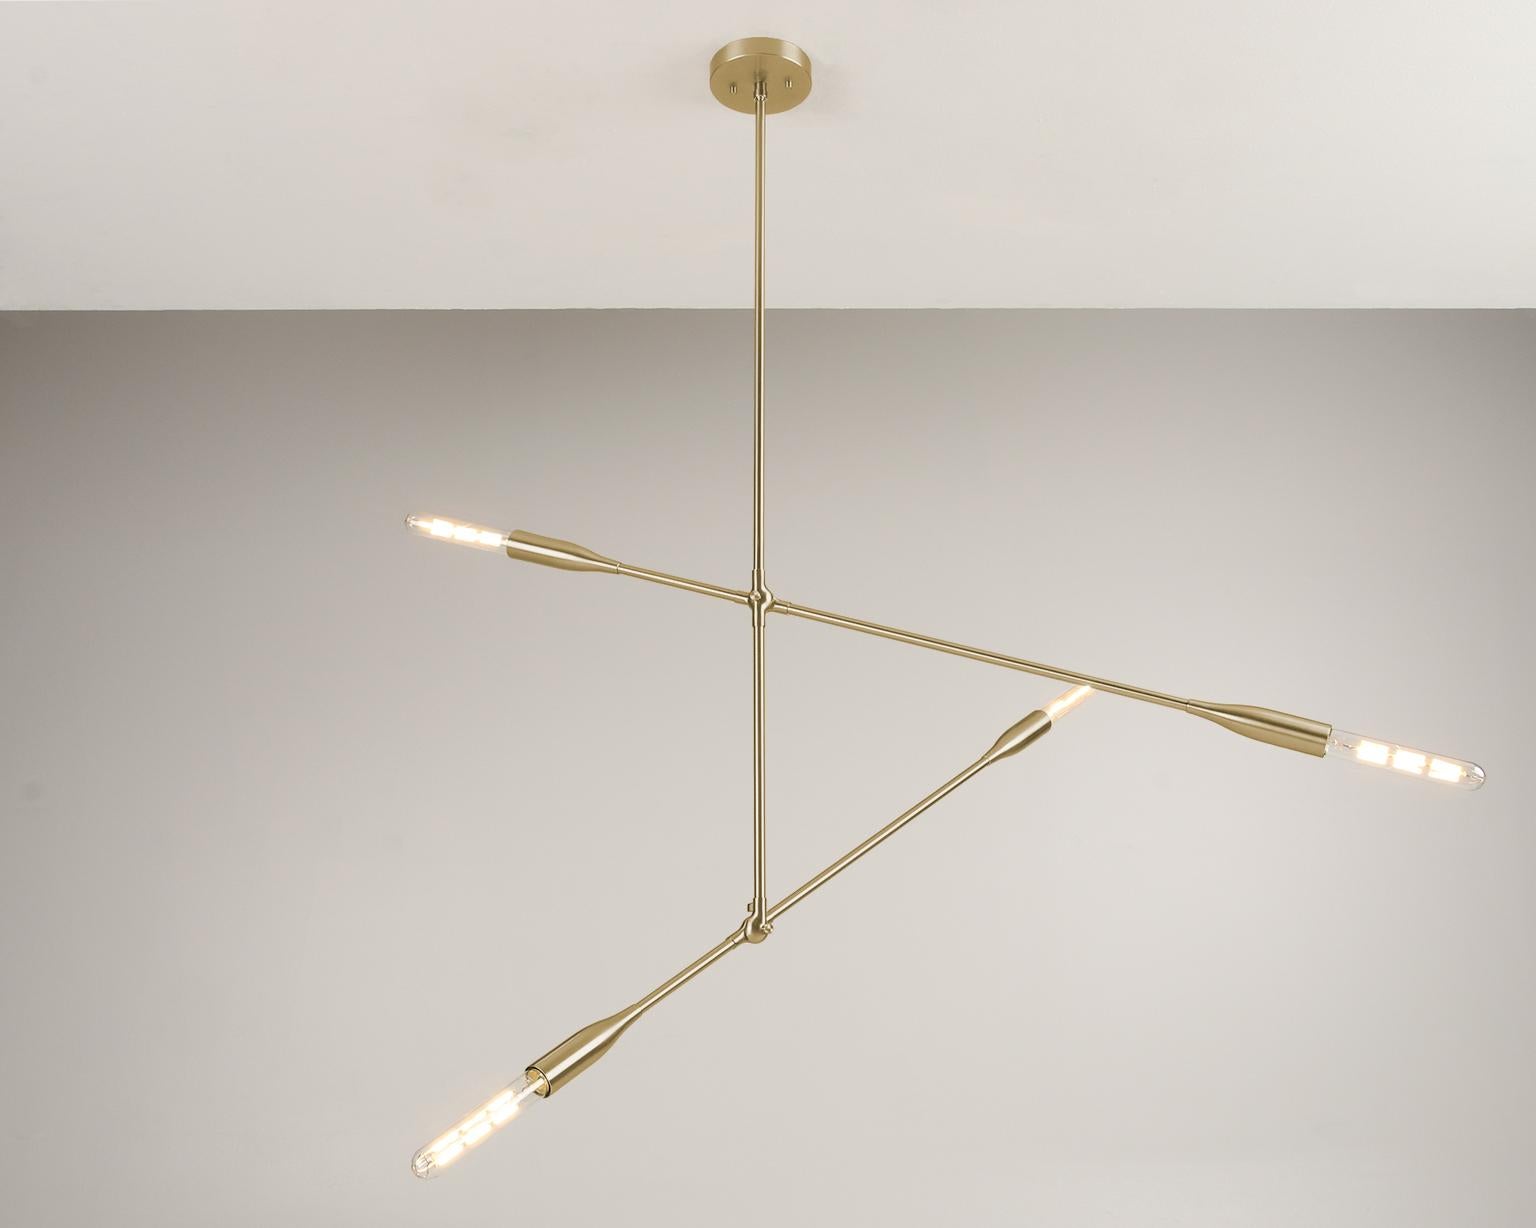 The Sorenthia 2-Arm Light is a modern, linear pendant with bold, elegant lines and dramatic negative space. The custom-made light fixture incorporates an element of the organic in its design language with long, reaching arms that can be adjusted on